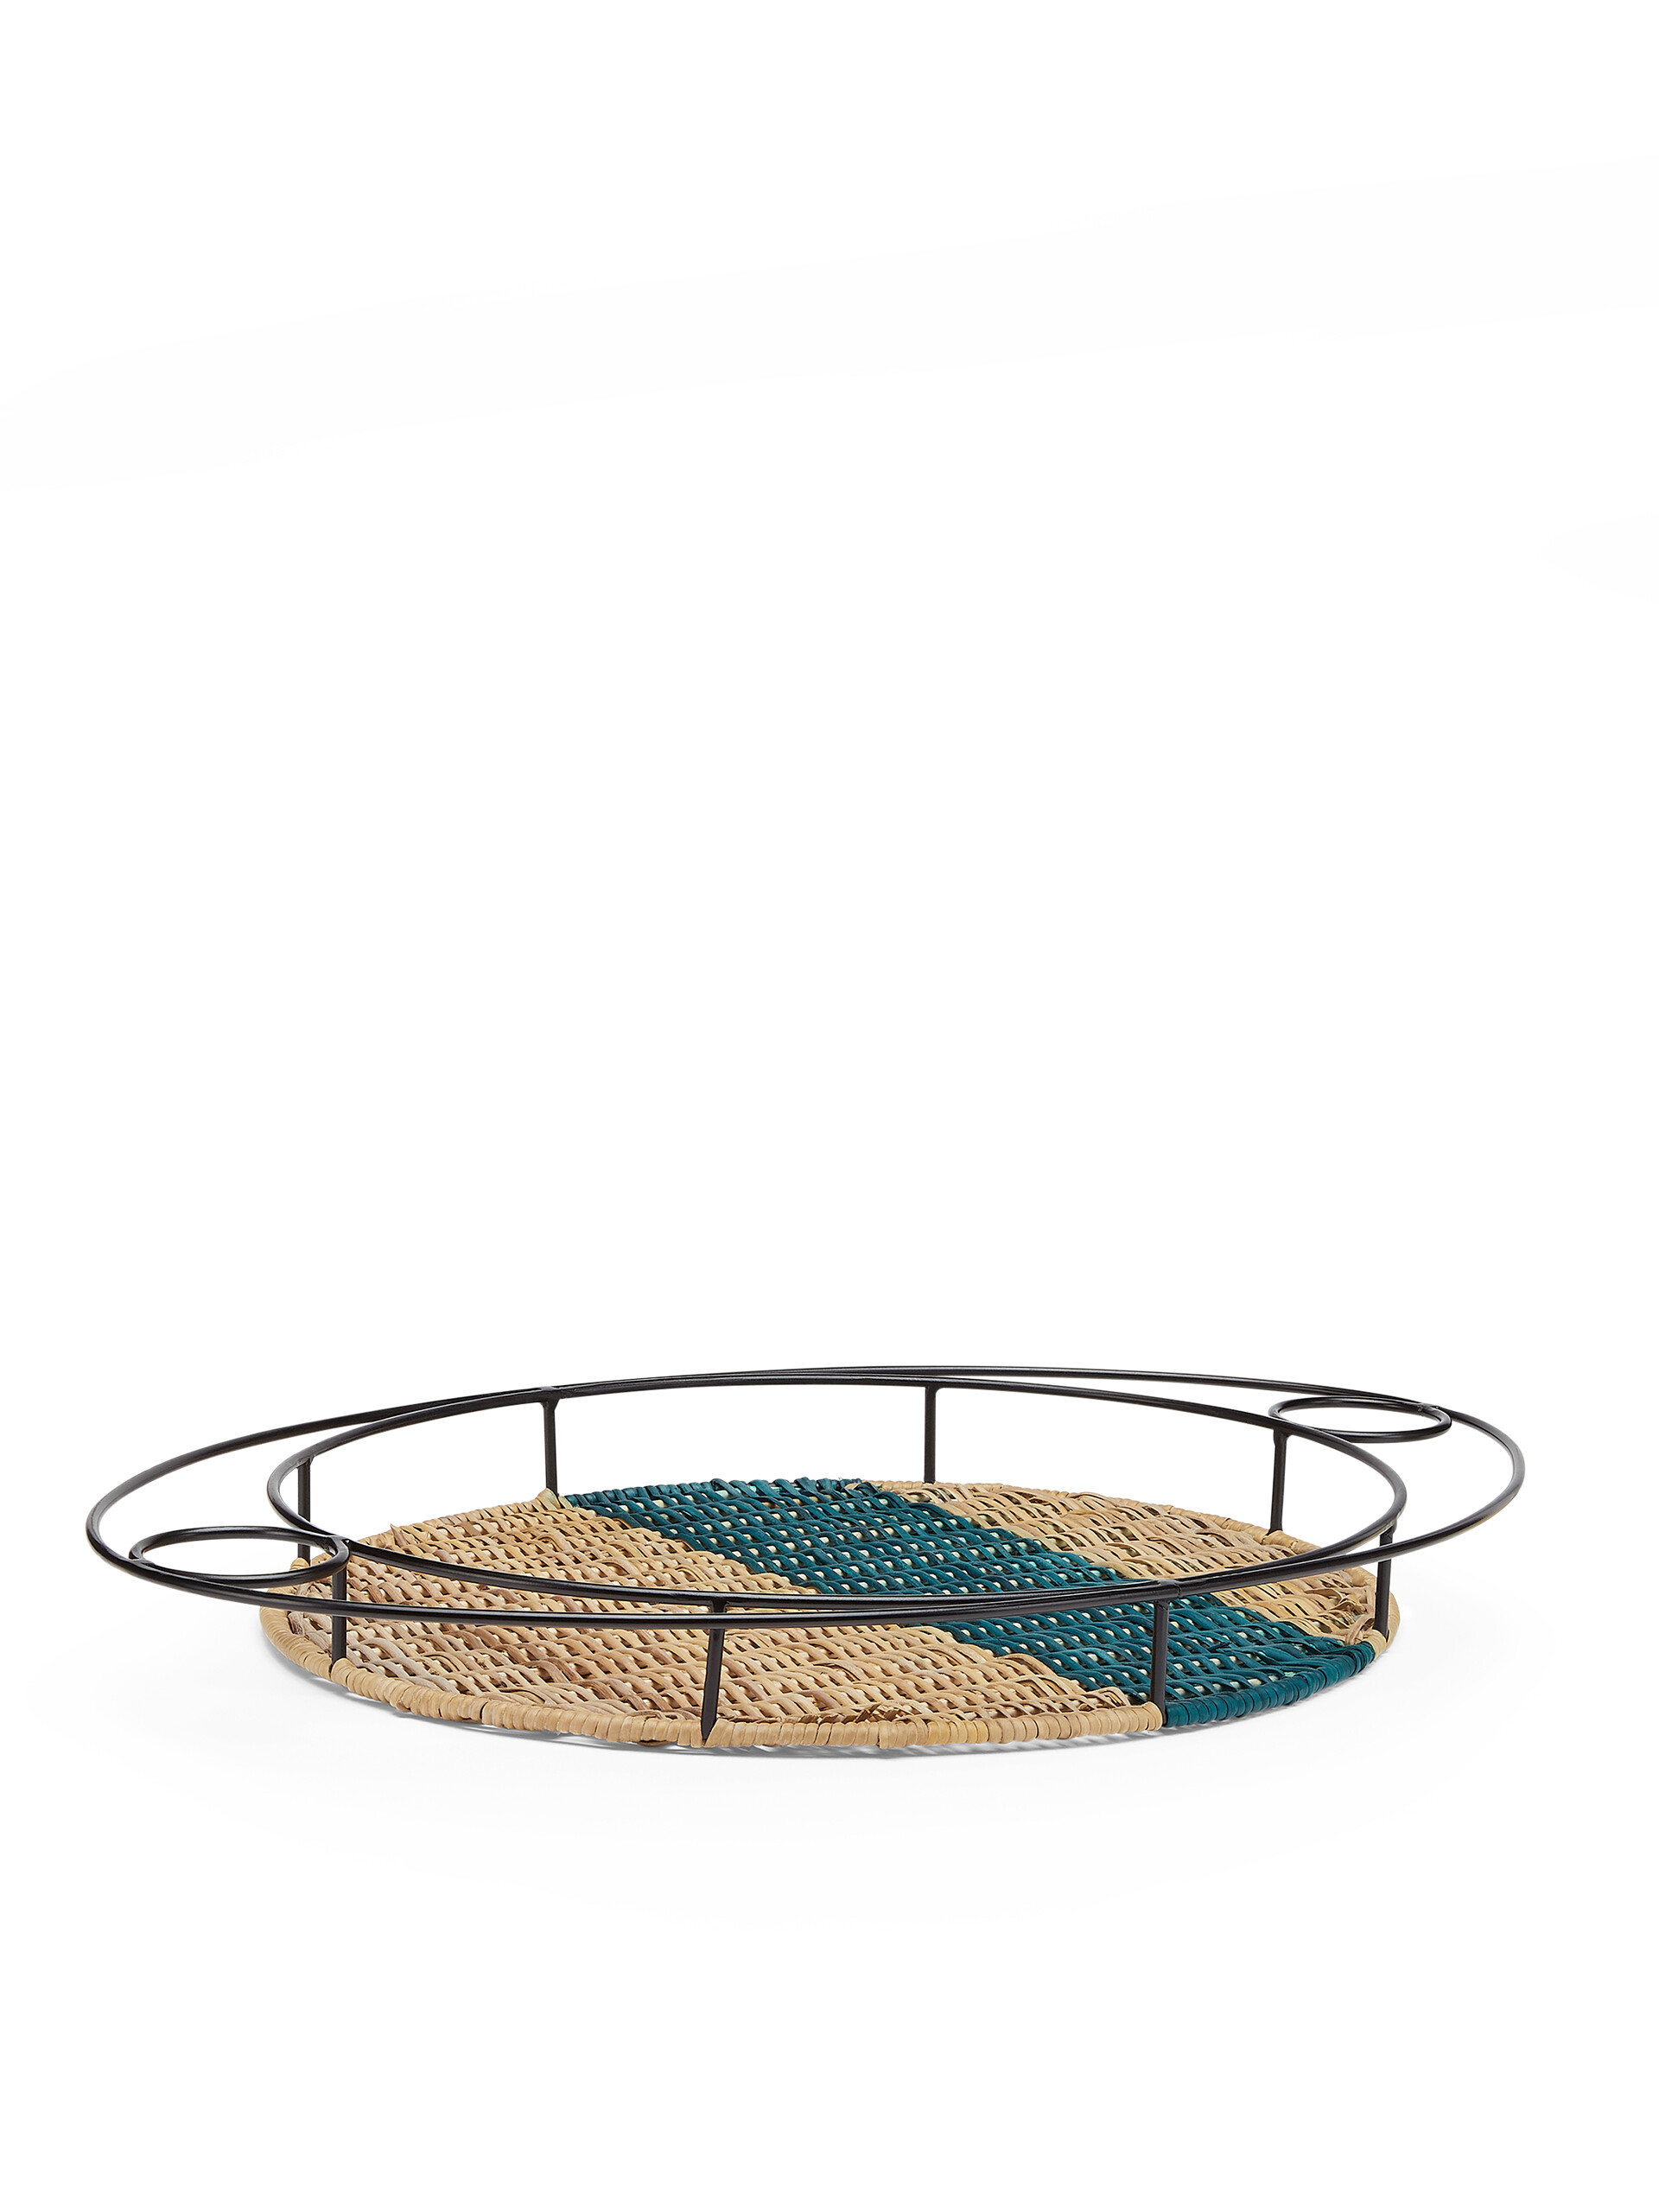 MARNI MARKET oval tray in iron and blue and beige wicker - Accessories - Image 2